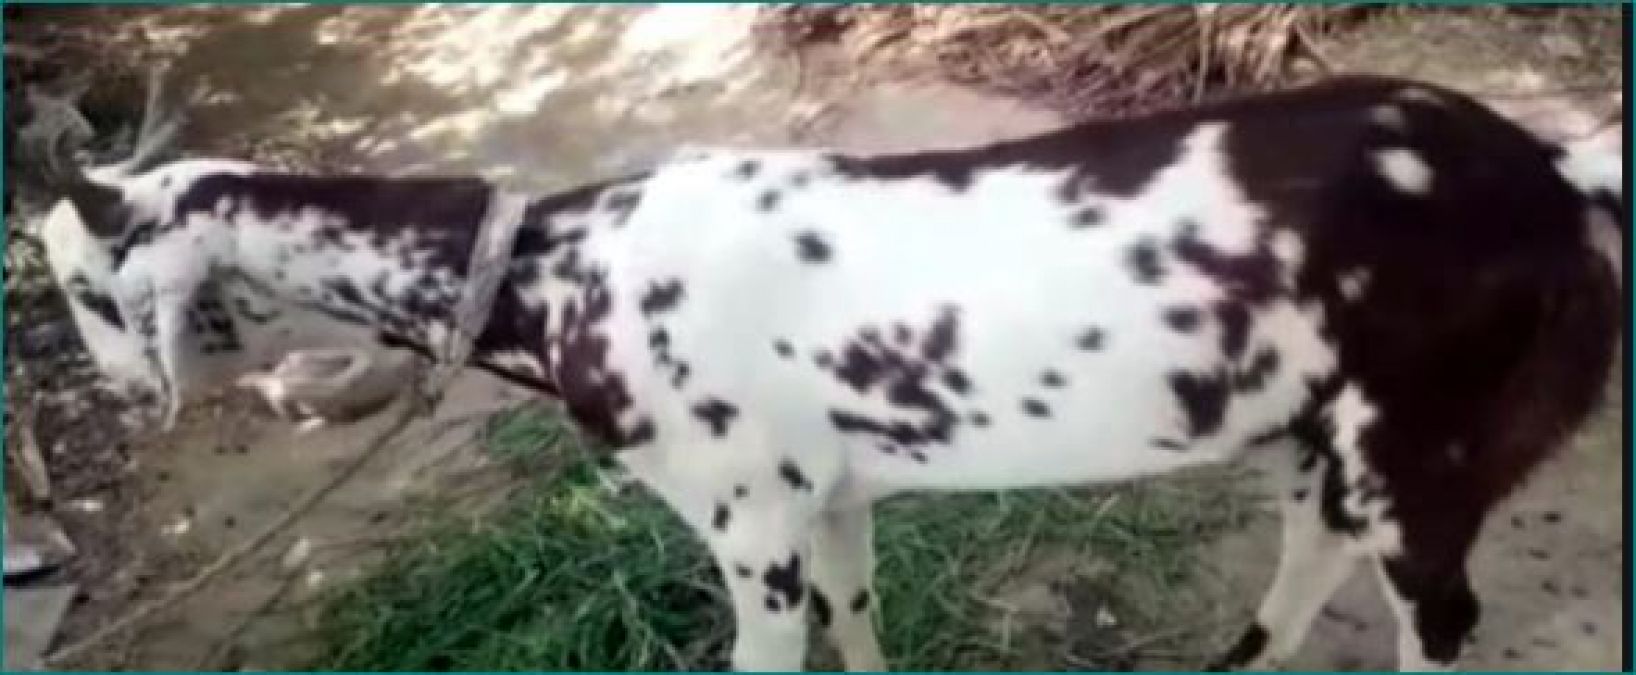 This goat has Om written on one side and Mohammed on the other, photos viral